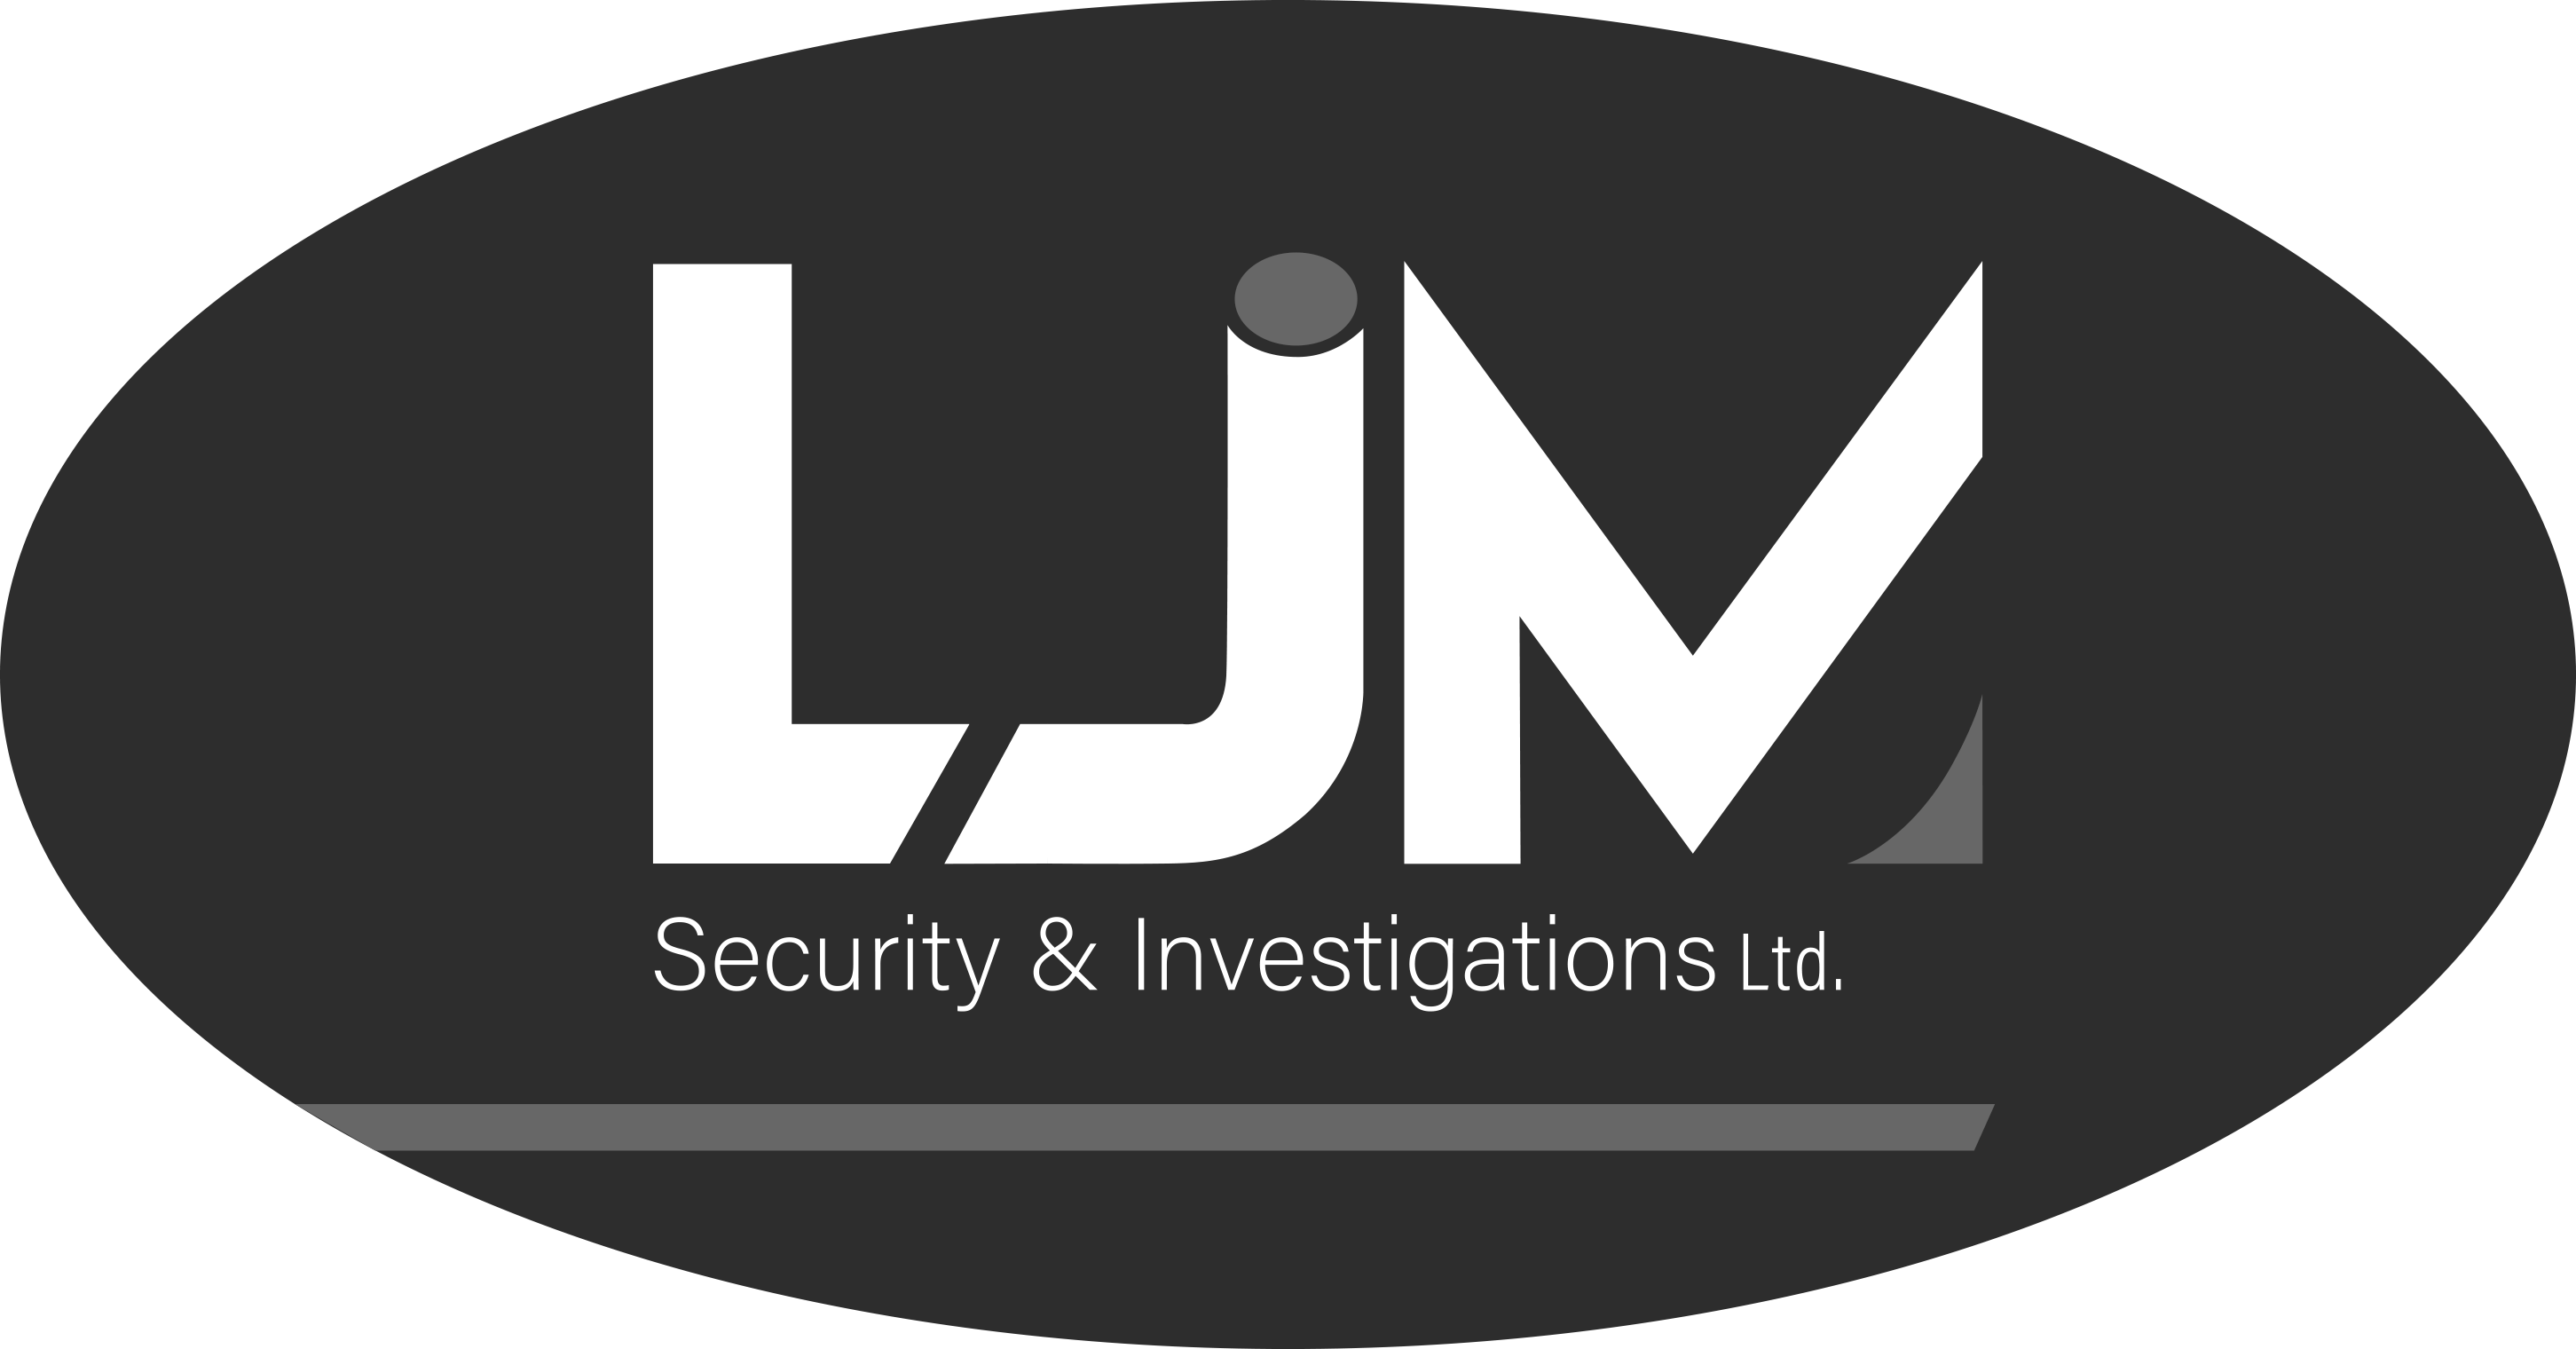 We're sponsored by LJM Security & Investigations 